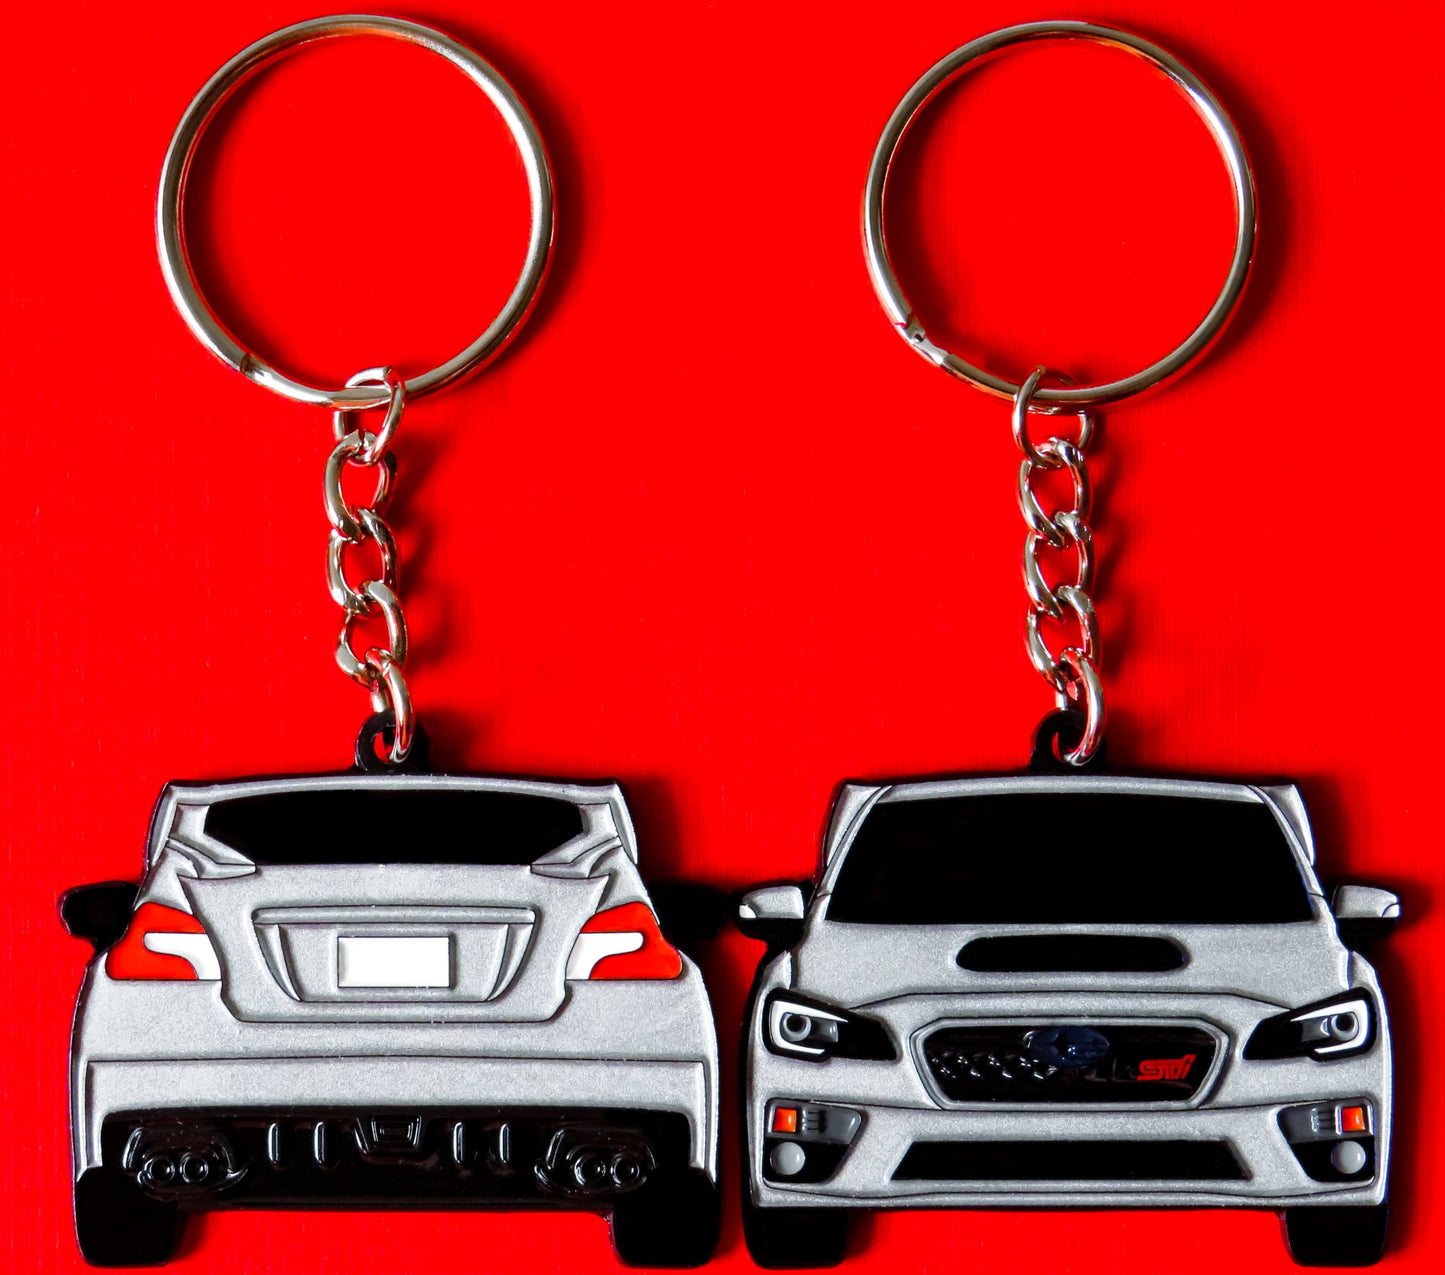 Silver Subaru WRX STI 2-Sided Keychain that fits on a key fob, Precision-Crafted Design, Ideal for WRX STI Enthusiasts, Rally Car Lovers, and Automotive Fans. Elevate Your Keys with WRX STI Style and Unmatched Performance, A Must-Have Accessory for Subaru WRX STI Owners. A great gift for owners, fans, him, her, boyfriend, girlfriend, mom, dad, father, mother, and more!